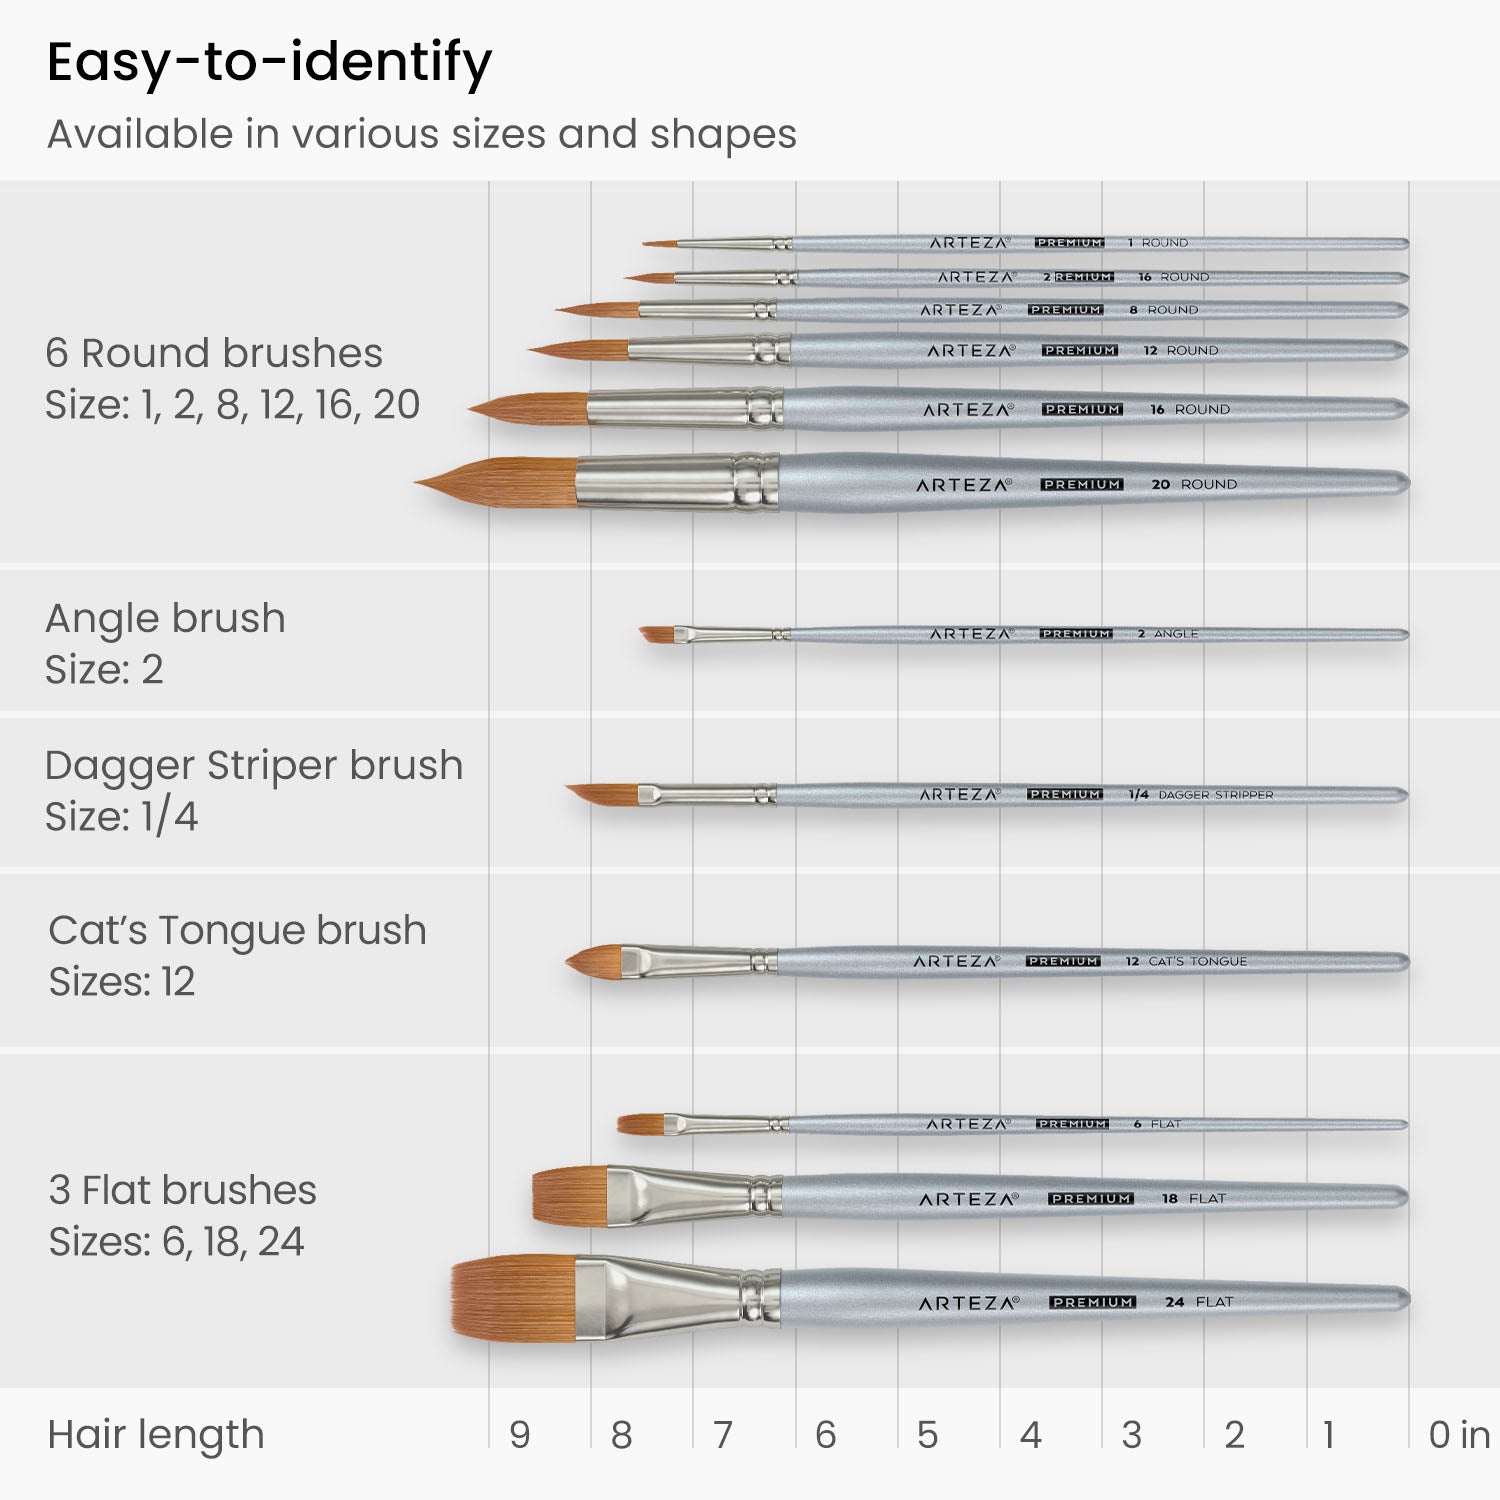 10 Best Watercolor Brushes: Reviews of Quality Watercolor Brush Sets